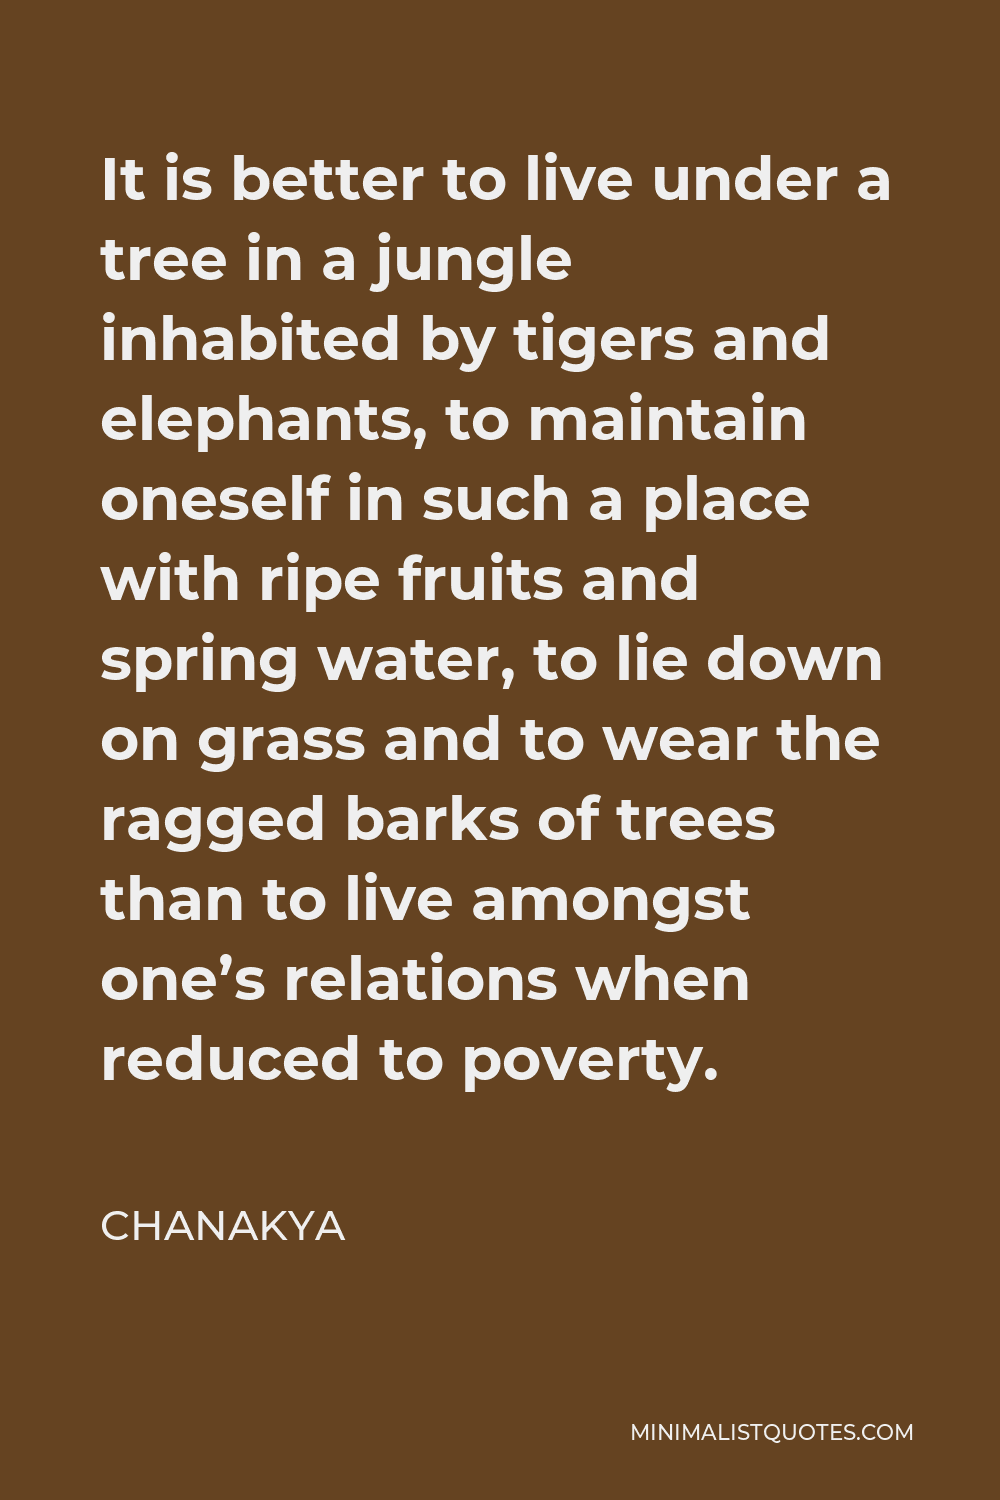 Chanakya Quote - It is better to live under a tree in a jungle inhabited by tigers and elephants, to maintain oneself in such a place with ripe fruits and spring water, to lie down on grass and to wear the ragged barks of trees than to live amongst one’s relations when reduced to poverty.